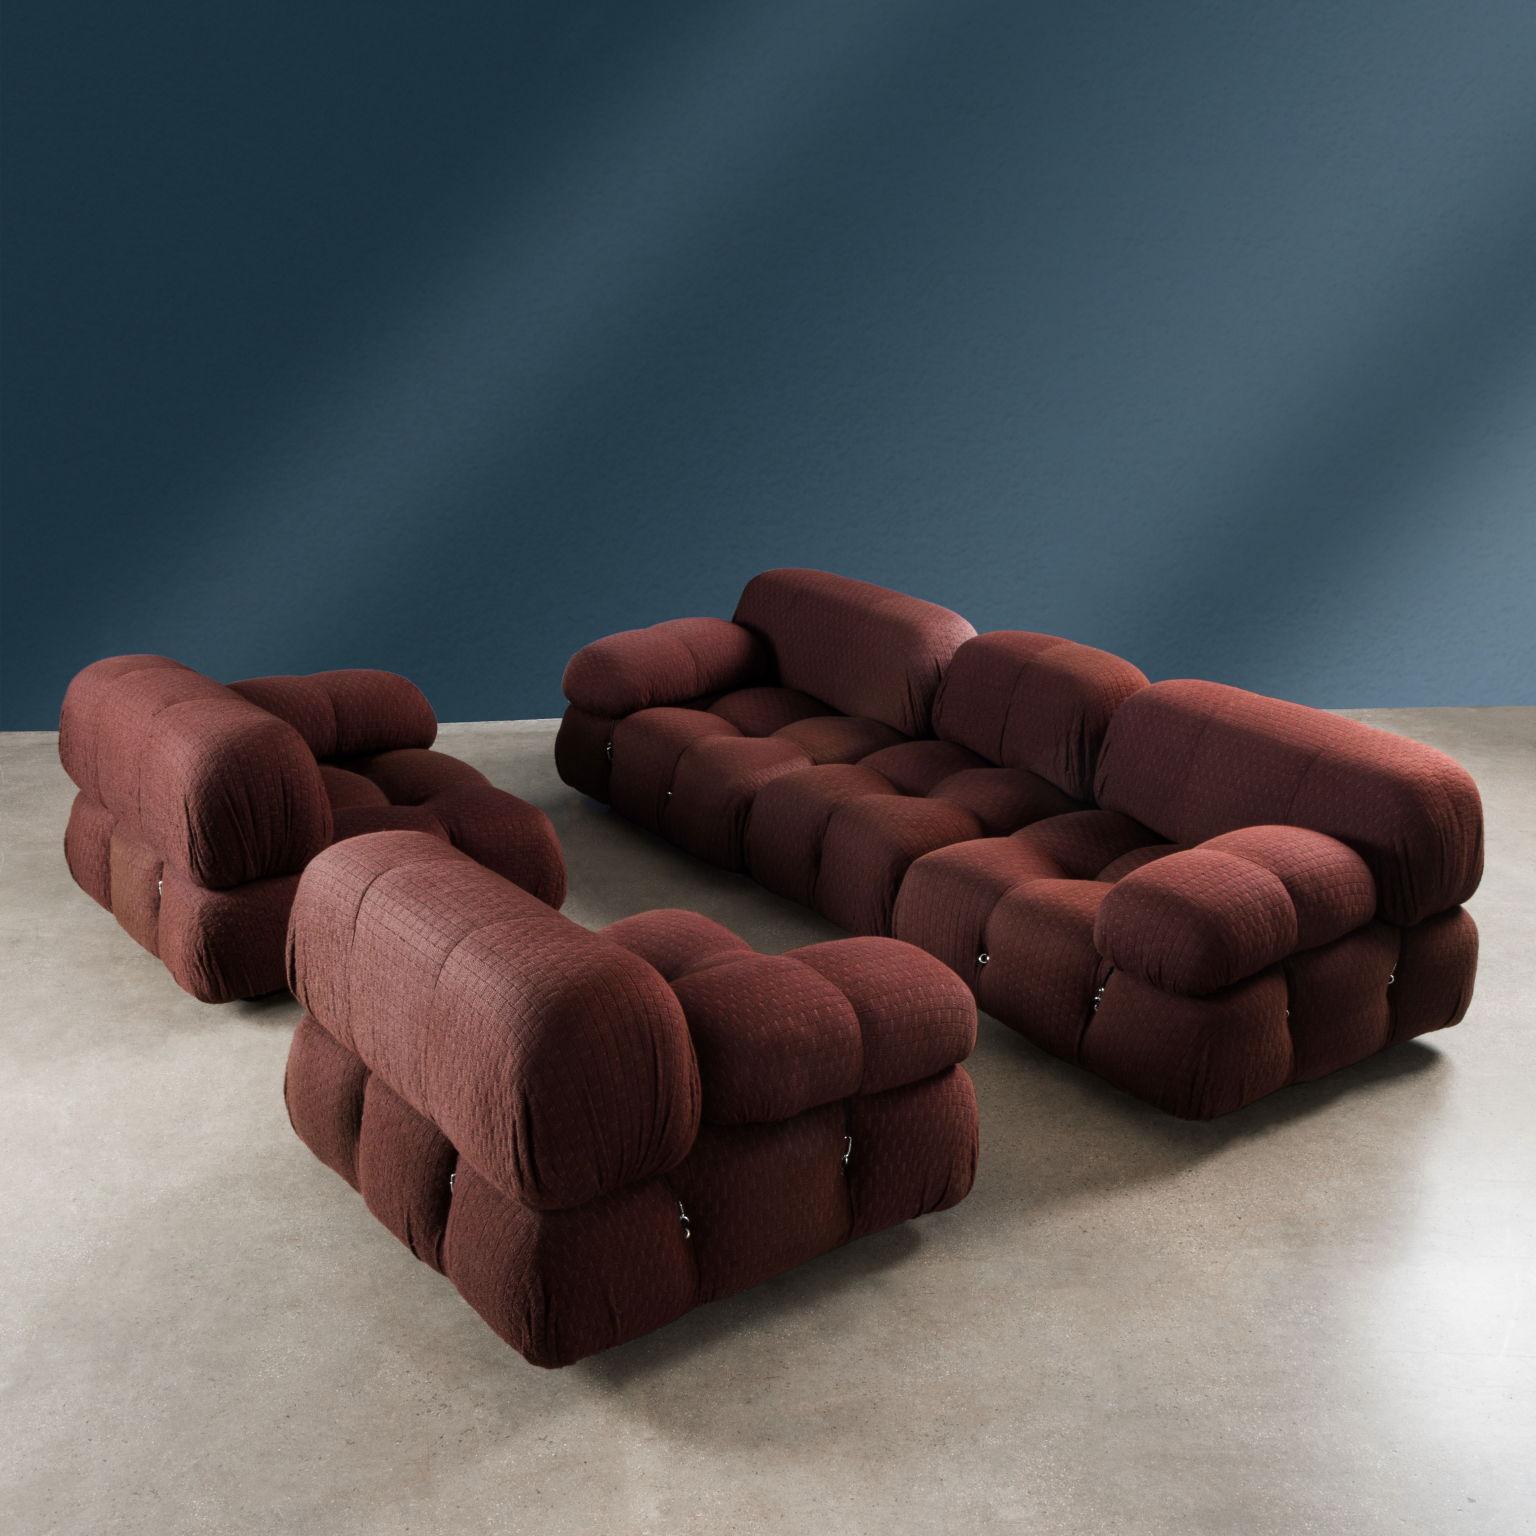 Iconic modular sofa designed by Mario Bellini and produced by C&B since 1970.
Padded in polyurethane foam, covered in original fabric in excellent condition, 70s edition branded B&B.
Set consisting of five seats with armrests, one of which is